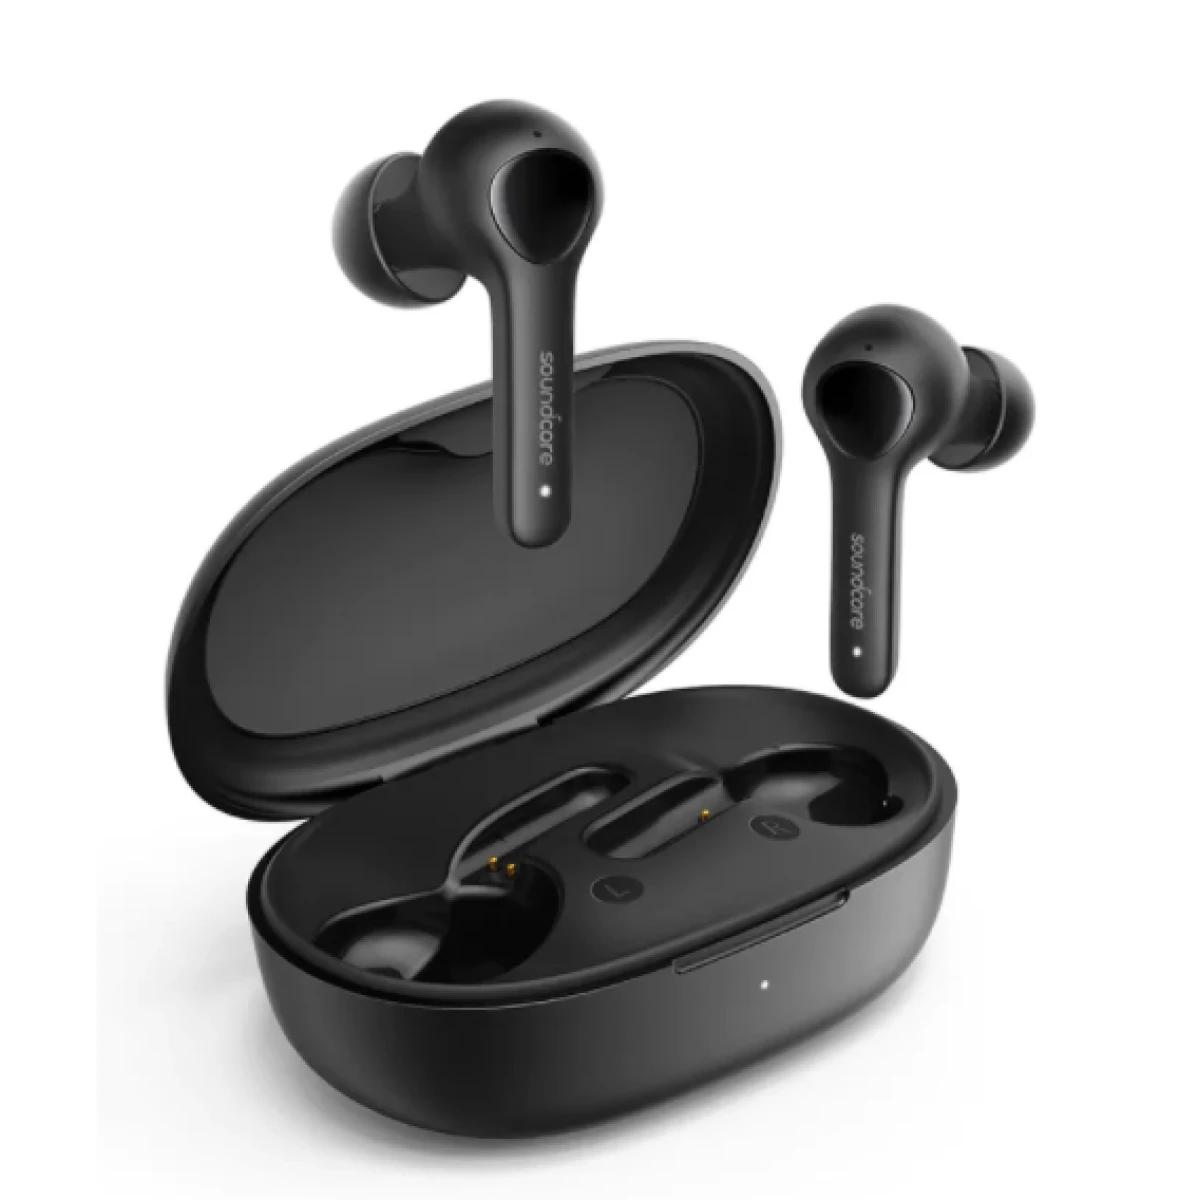 Anker Soundcore Wireless Earbuds Life Note A3908H13 - Black